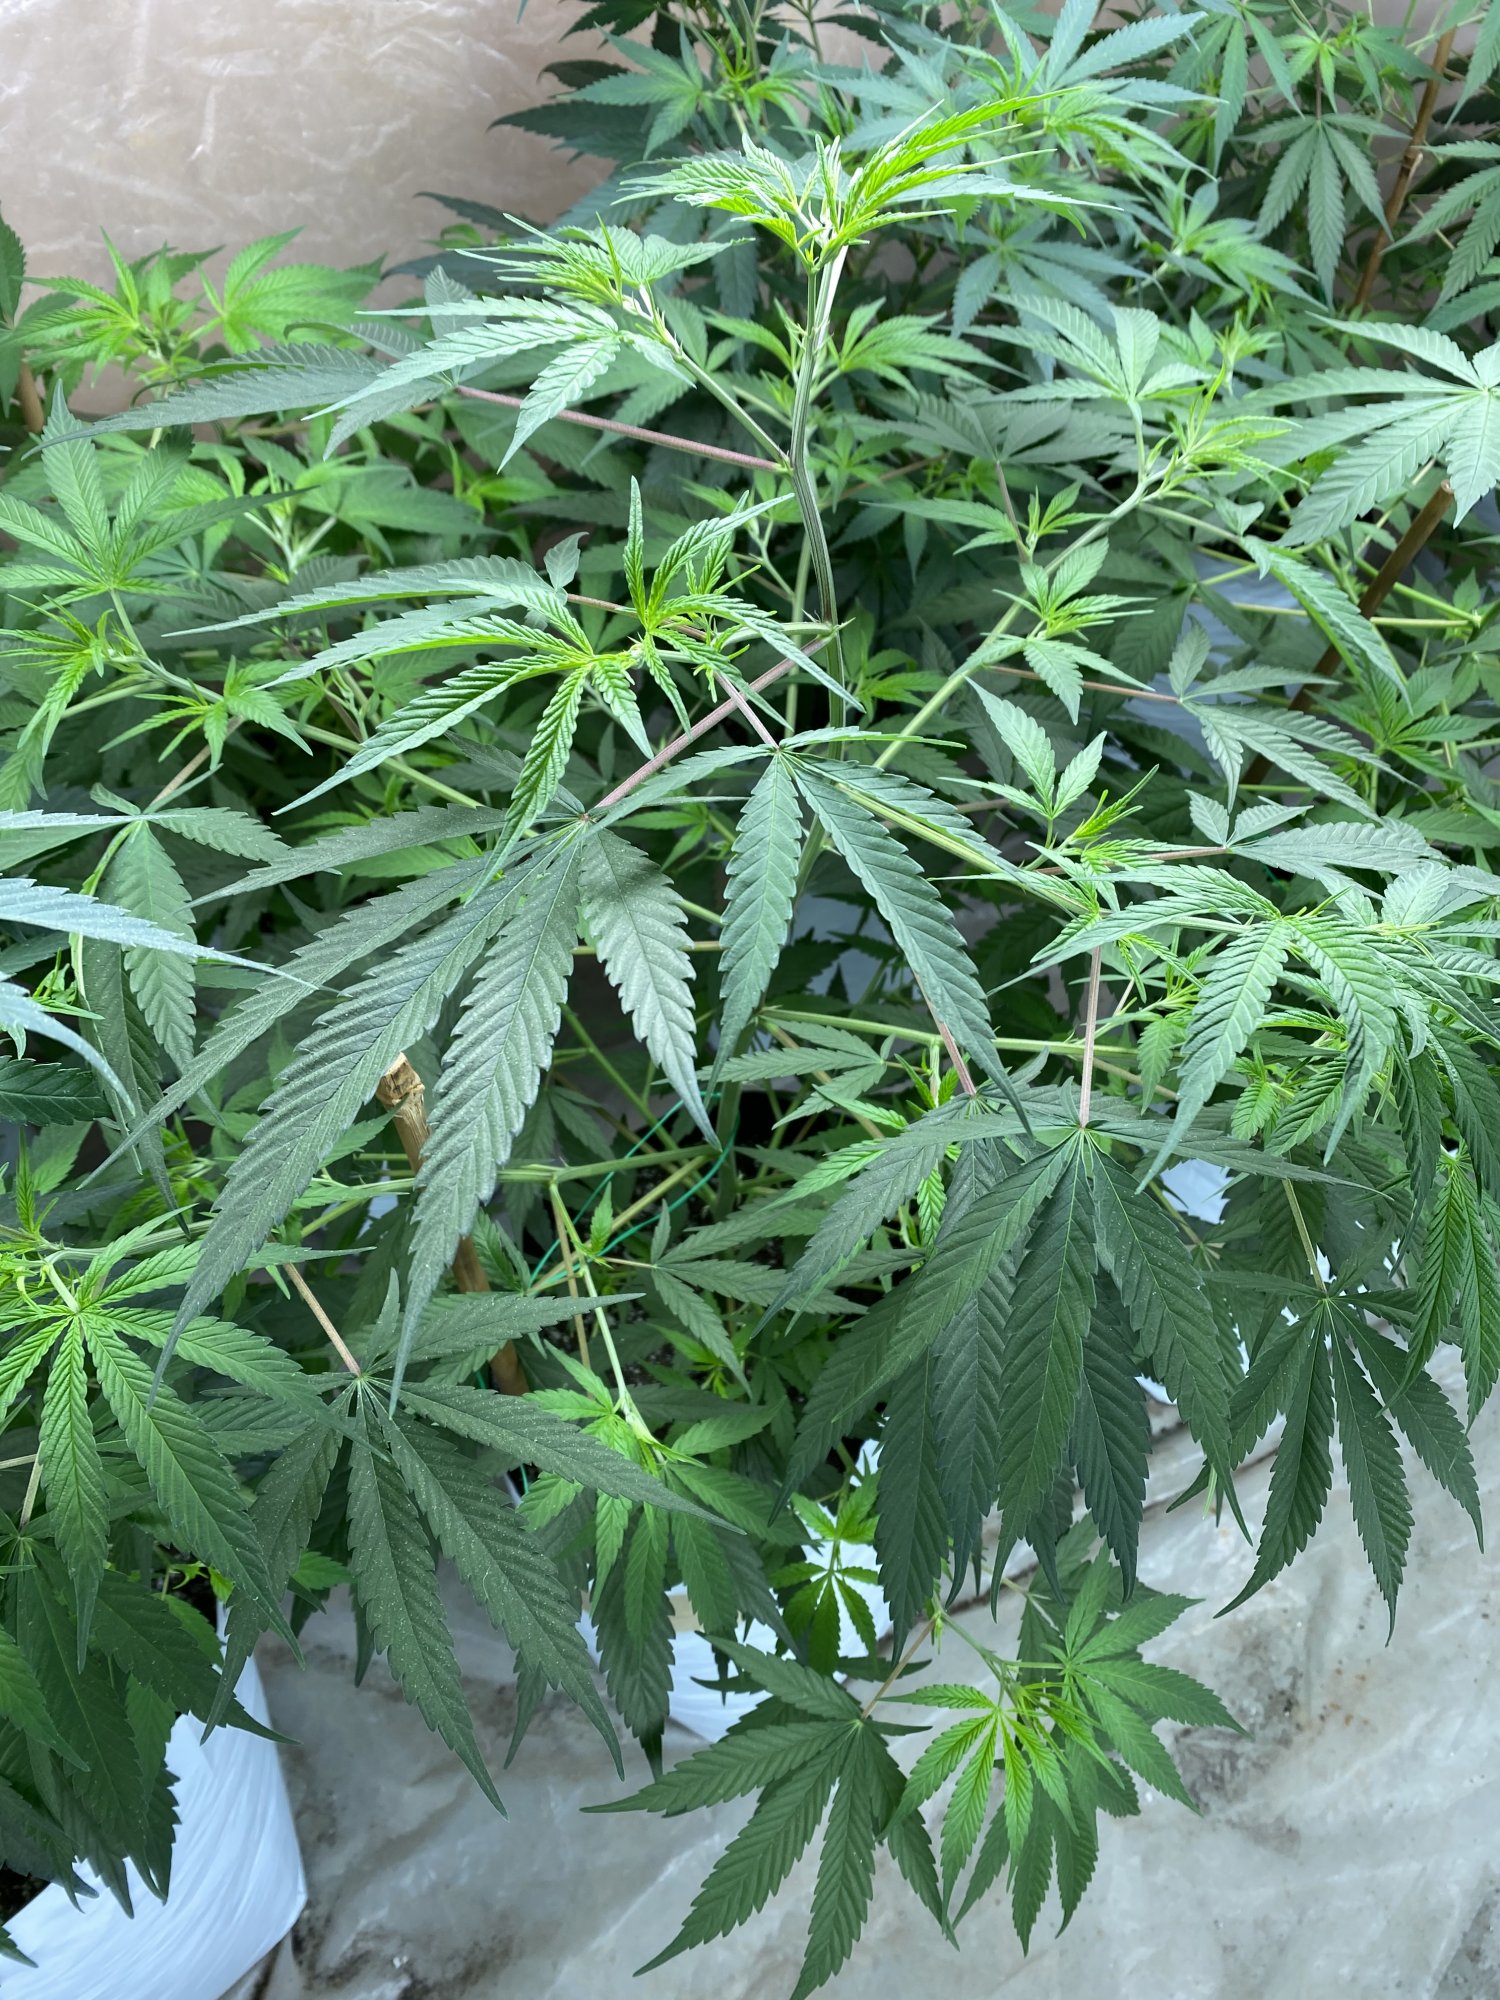 Question about introducing nutes to my grow along with ocean forest soil